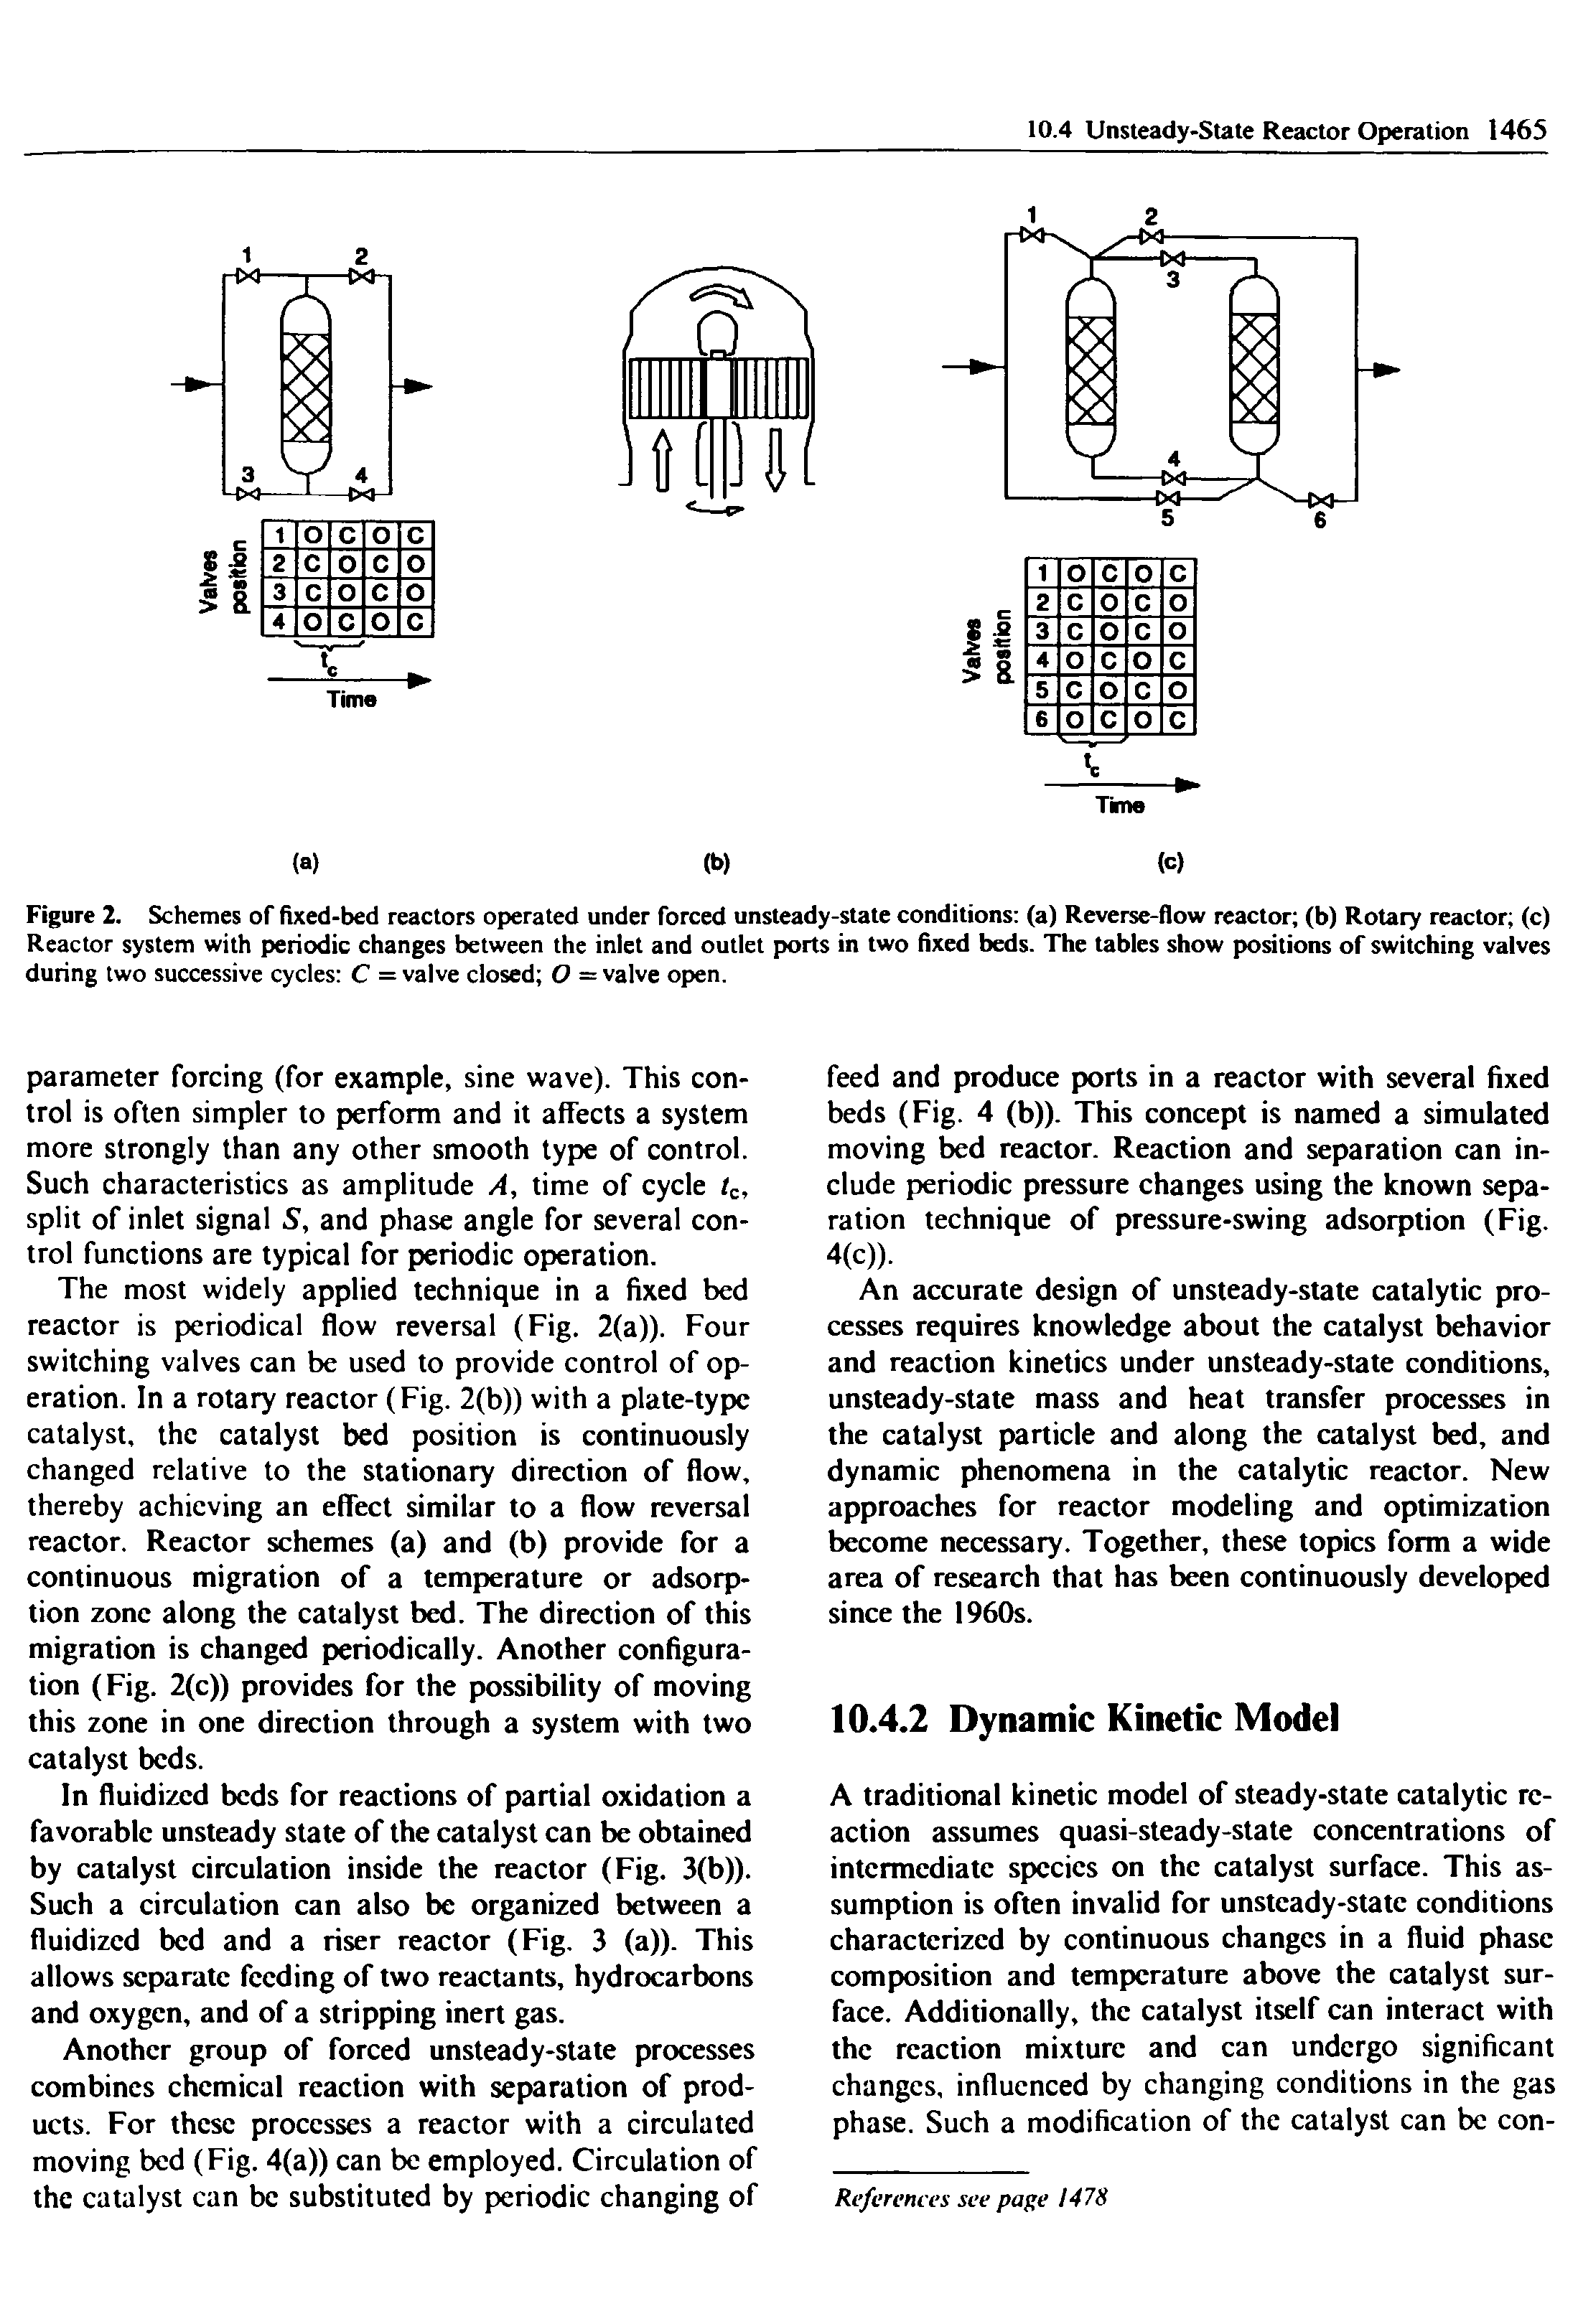 Figure 2. Schemes of fixed-bed reactors operated under forced unsteady-state conditions (a) Reverse-flow reactor (b) Rotary reactor (c) Reactor system with periodic changes between the inlet and outlet ports in two fixed beds. The tables show positions of switching valves during two successive cycles C = valve closed O = valve open.